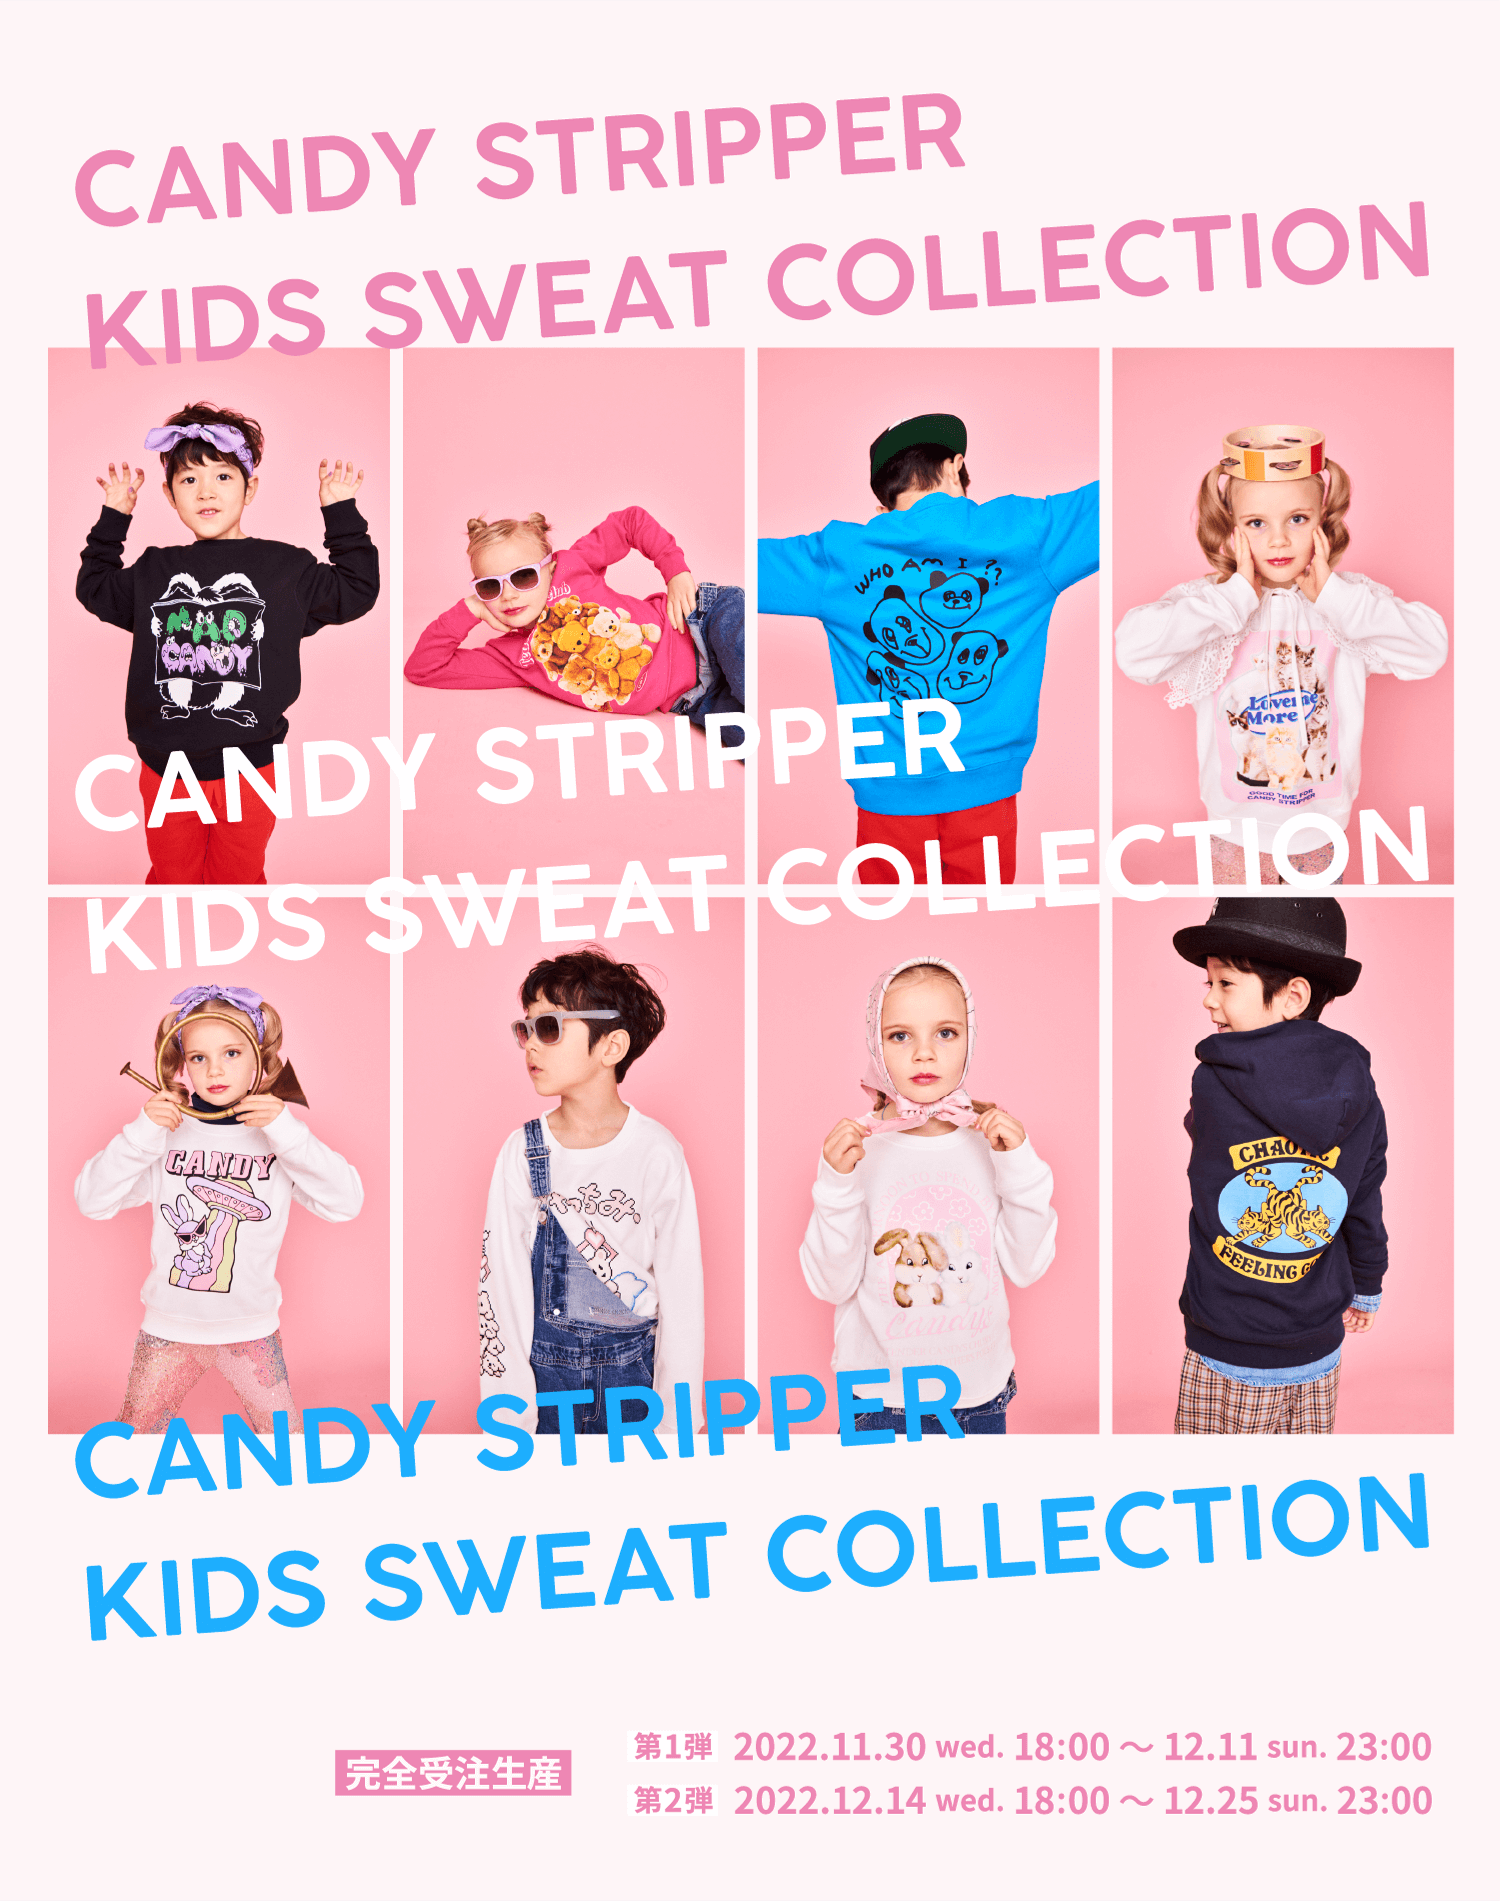 CANDYSTRIPPER KIDS SWEAT COLLECTION